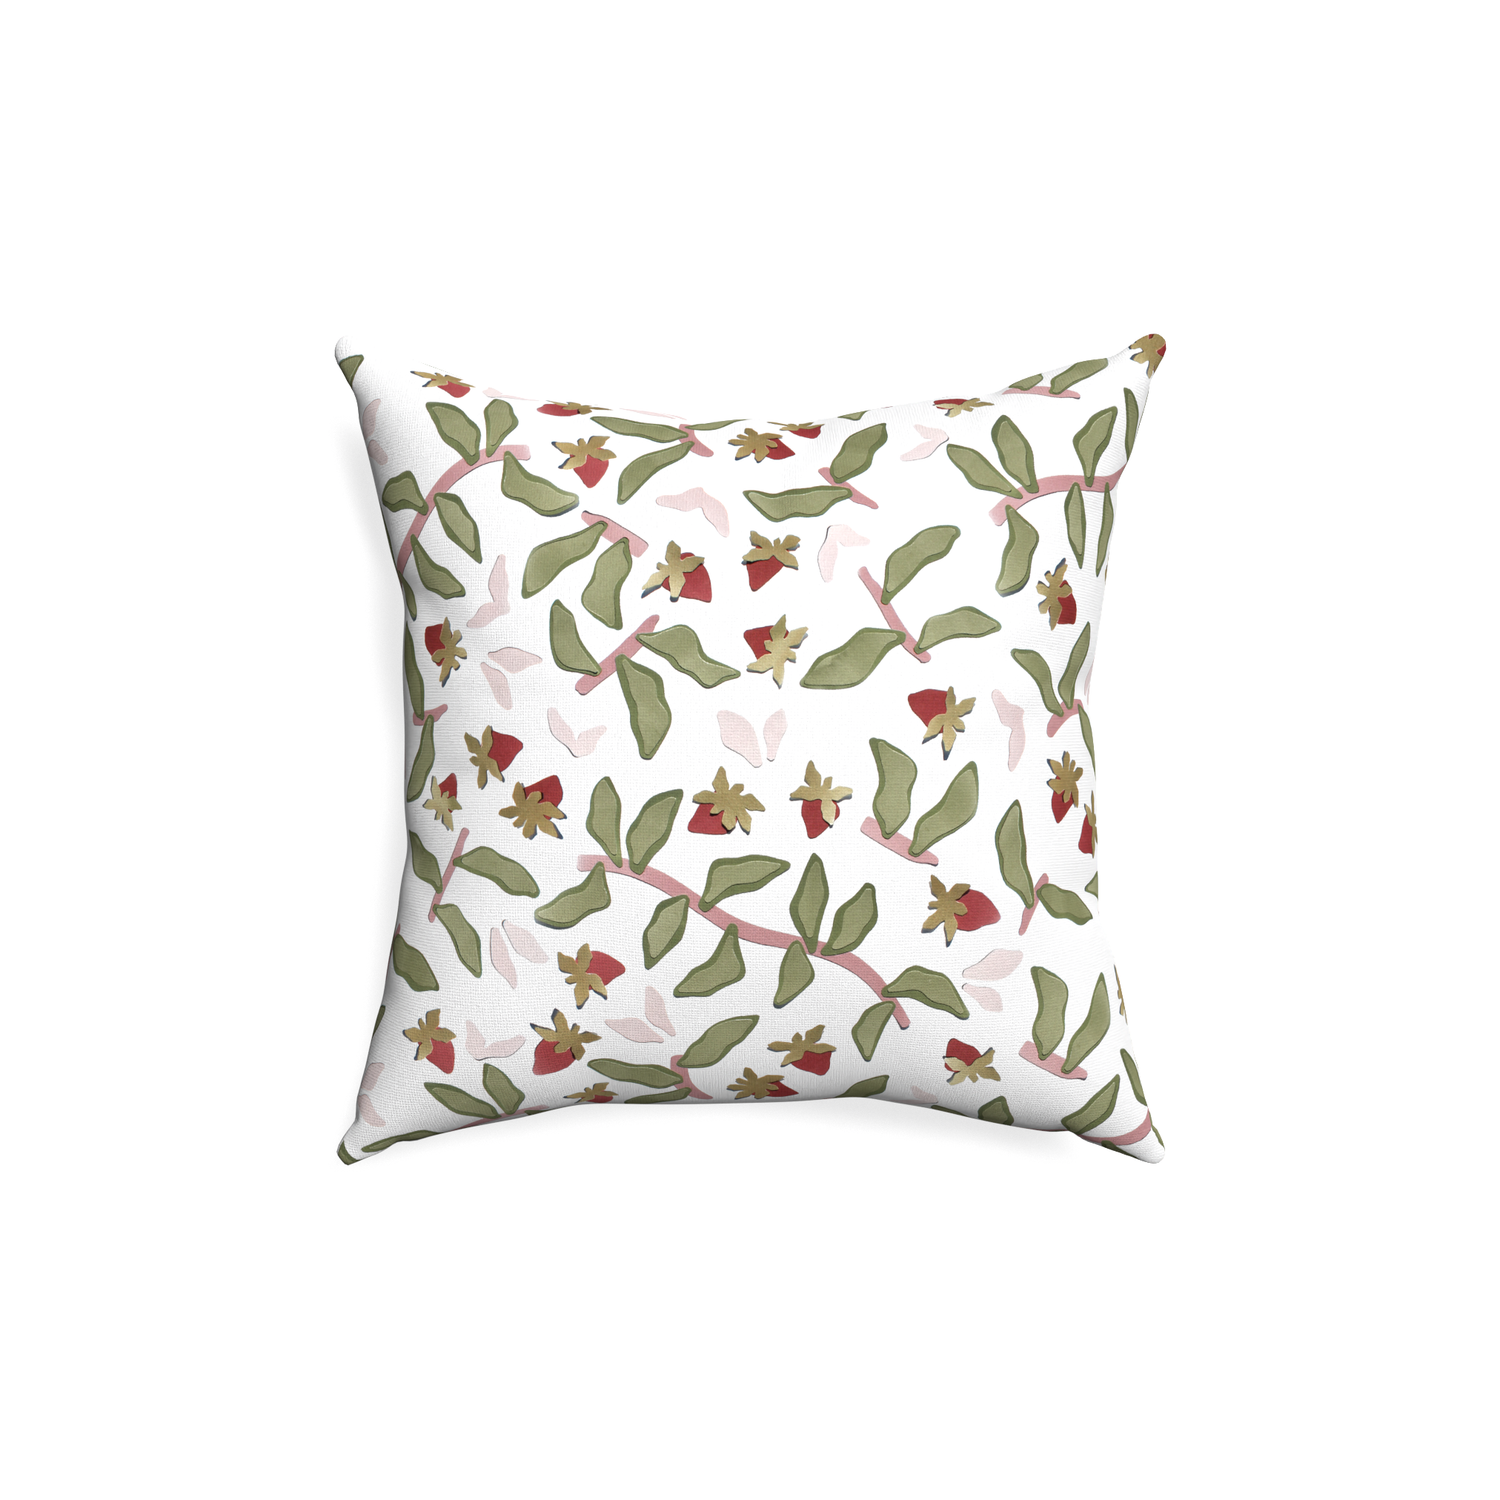 18-square nellie custom strawberry & botanicalpillow with none on white background